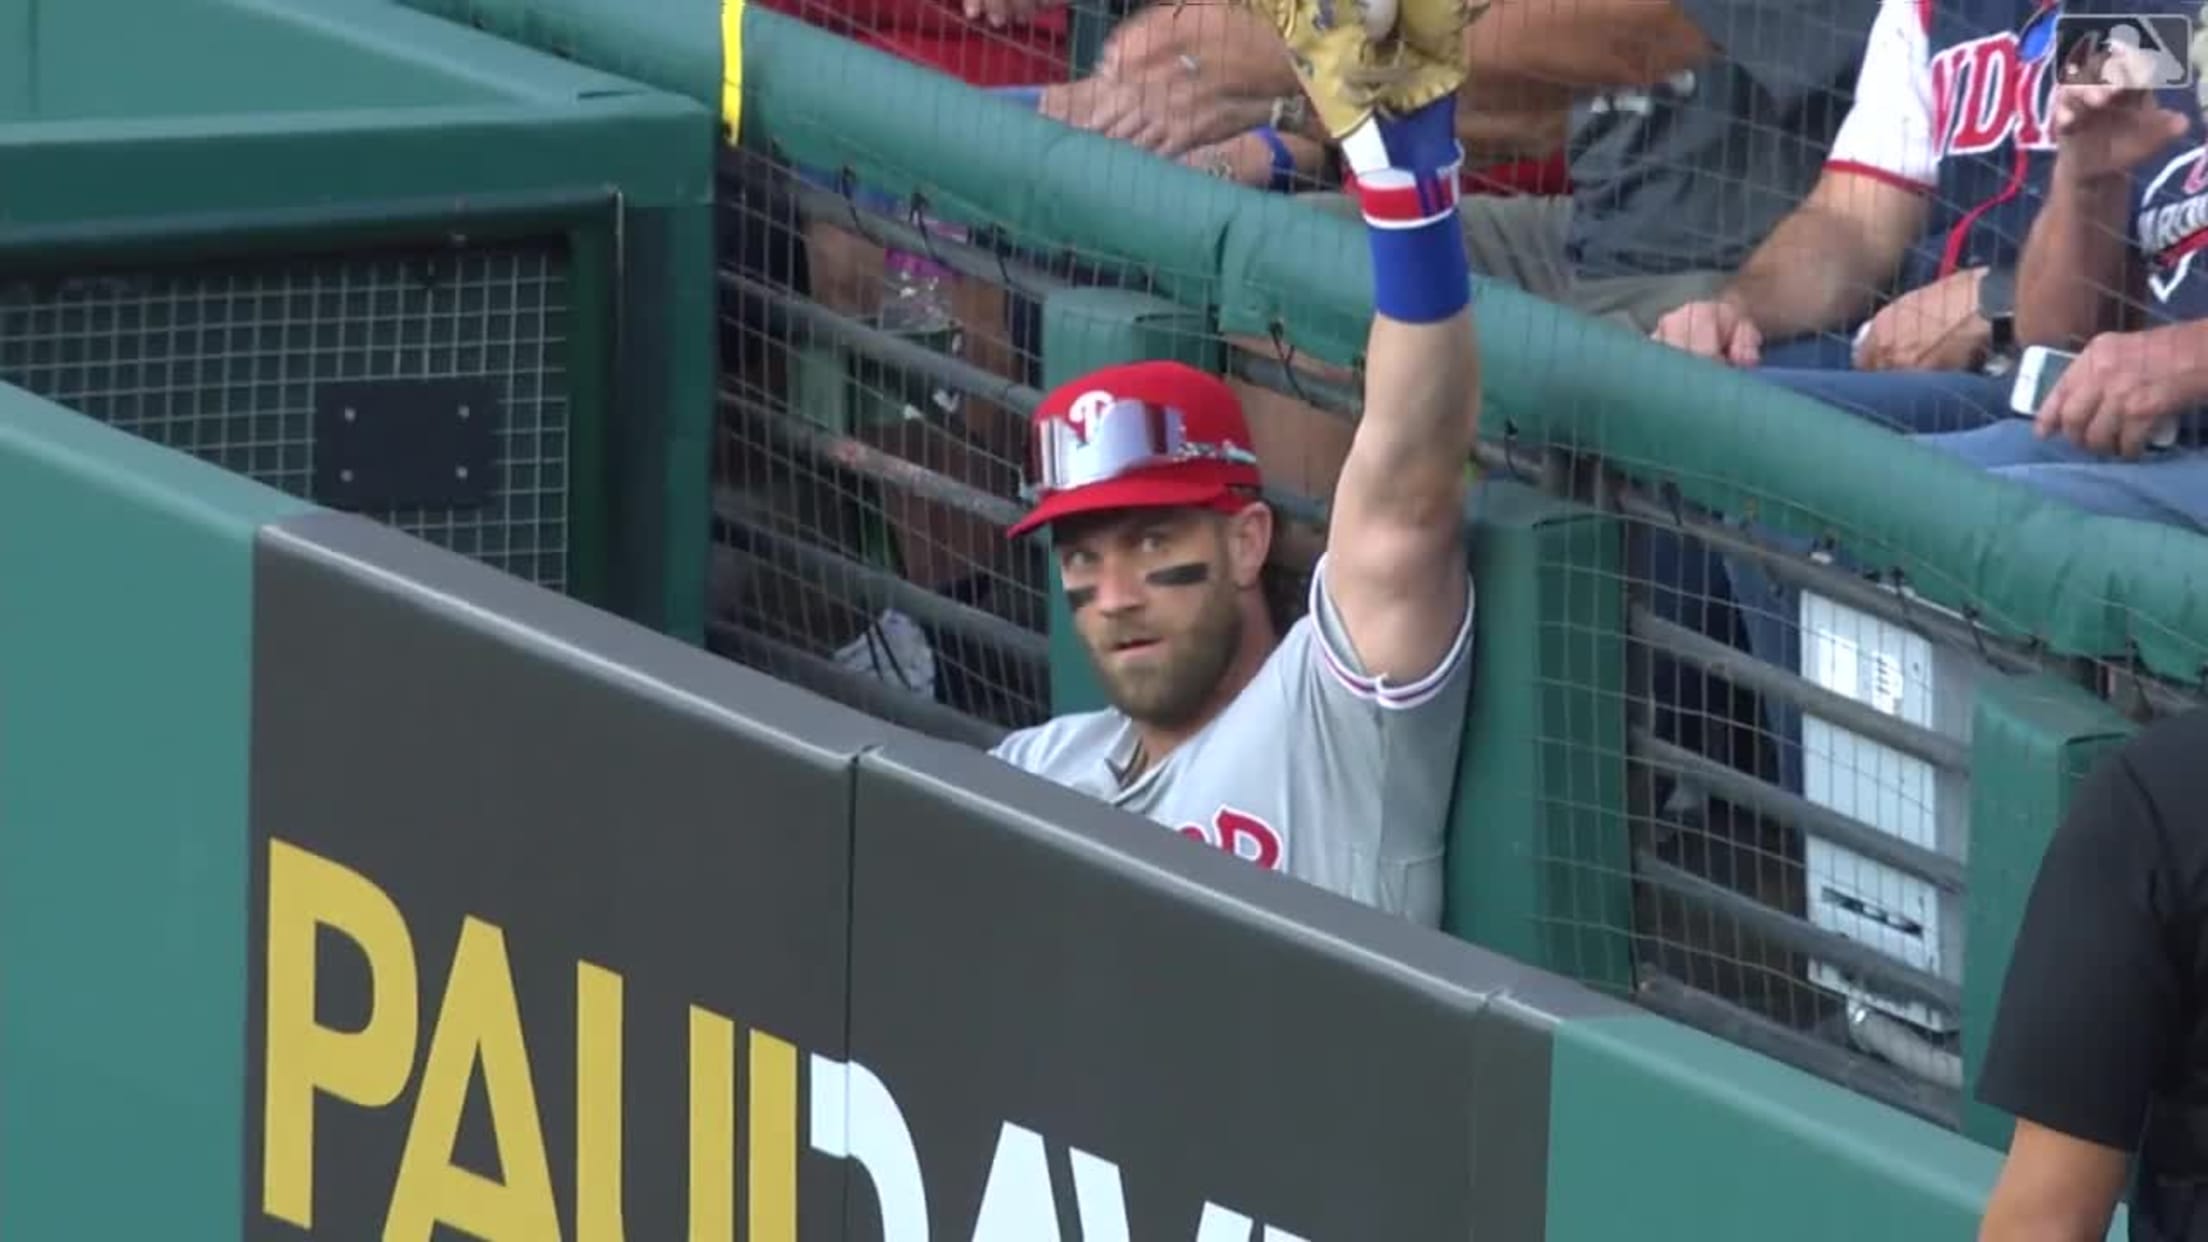 Bryce Harper has caught fire with the Phillies deep in the race